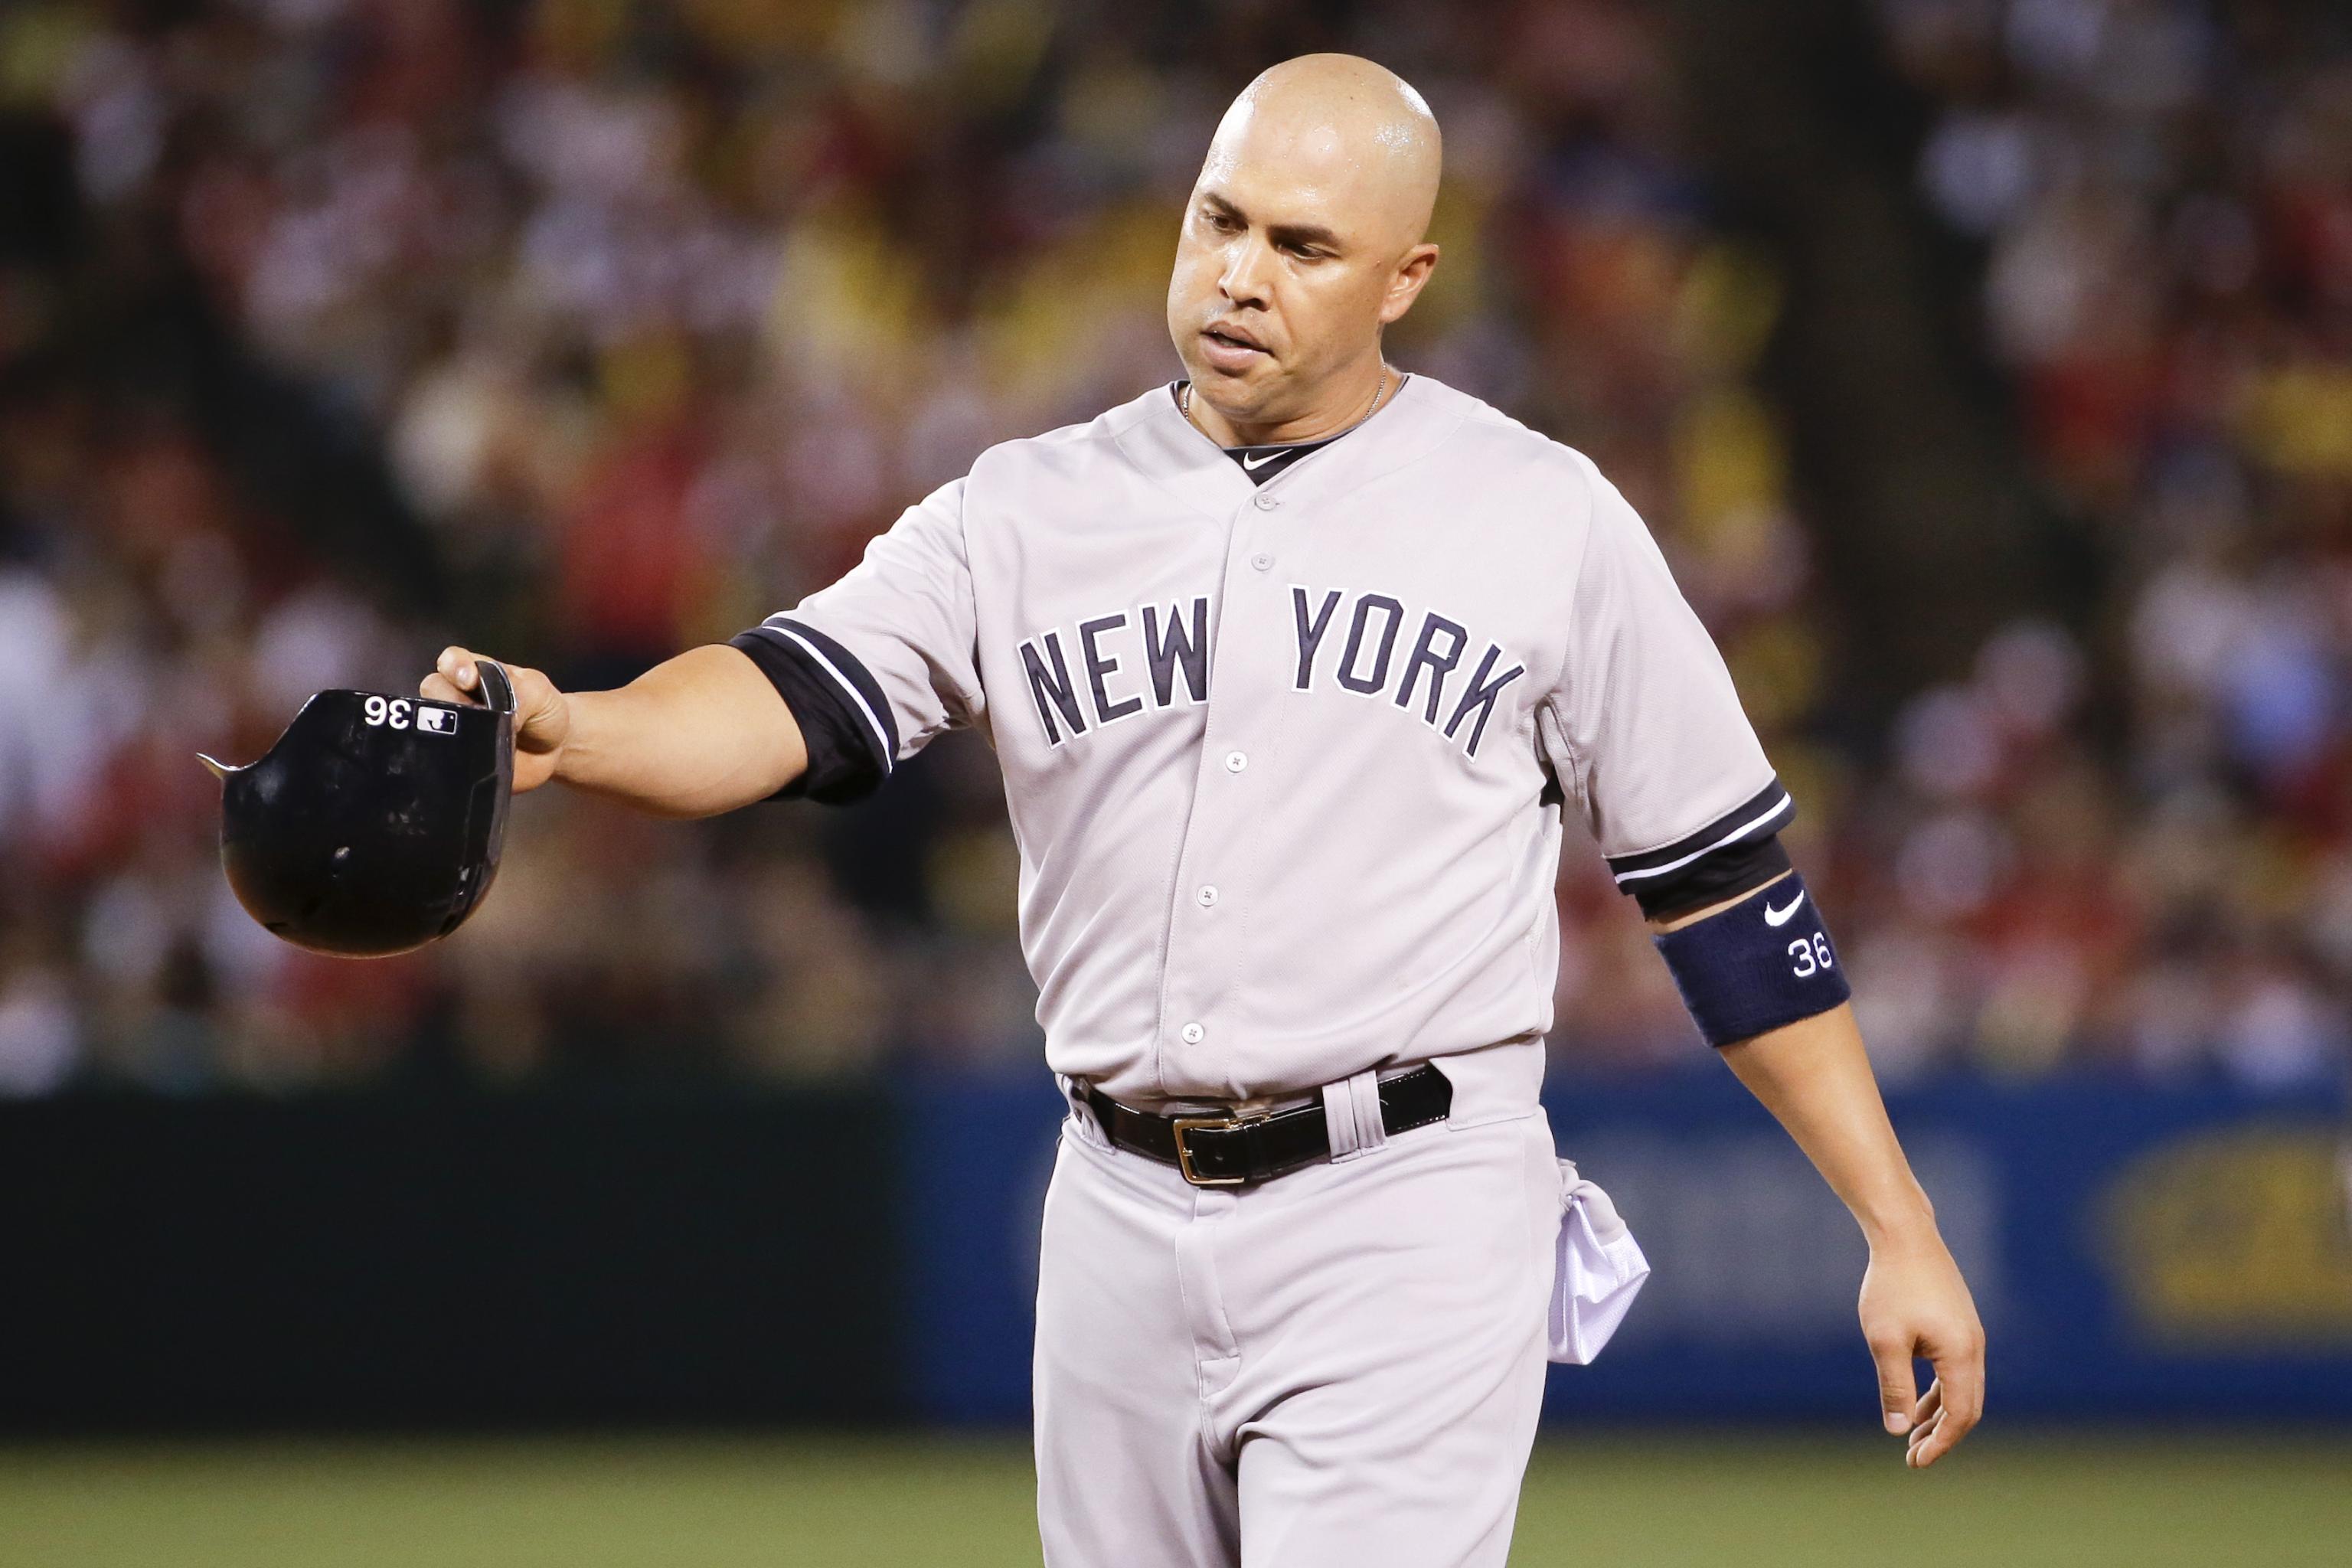 Carlos Beltran not in St. Louis Cardinals' lineup for Game 4 - Newsday